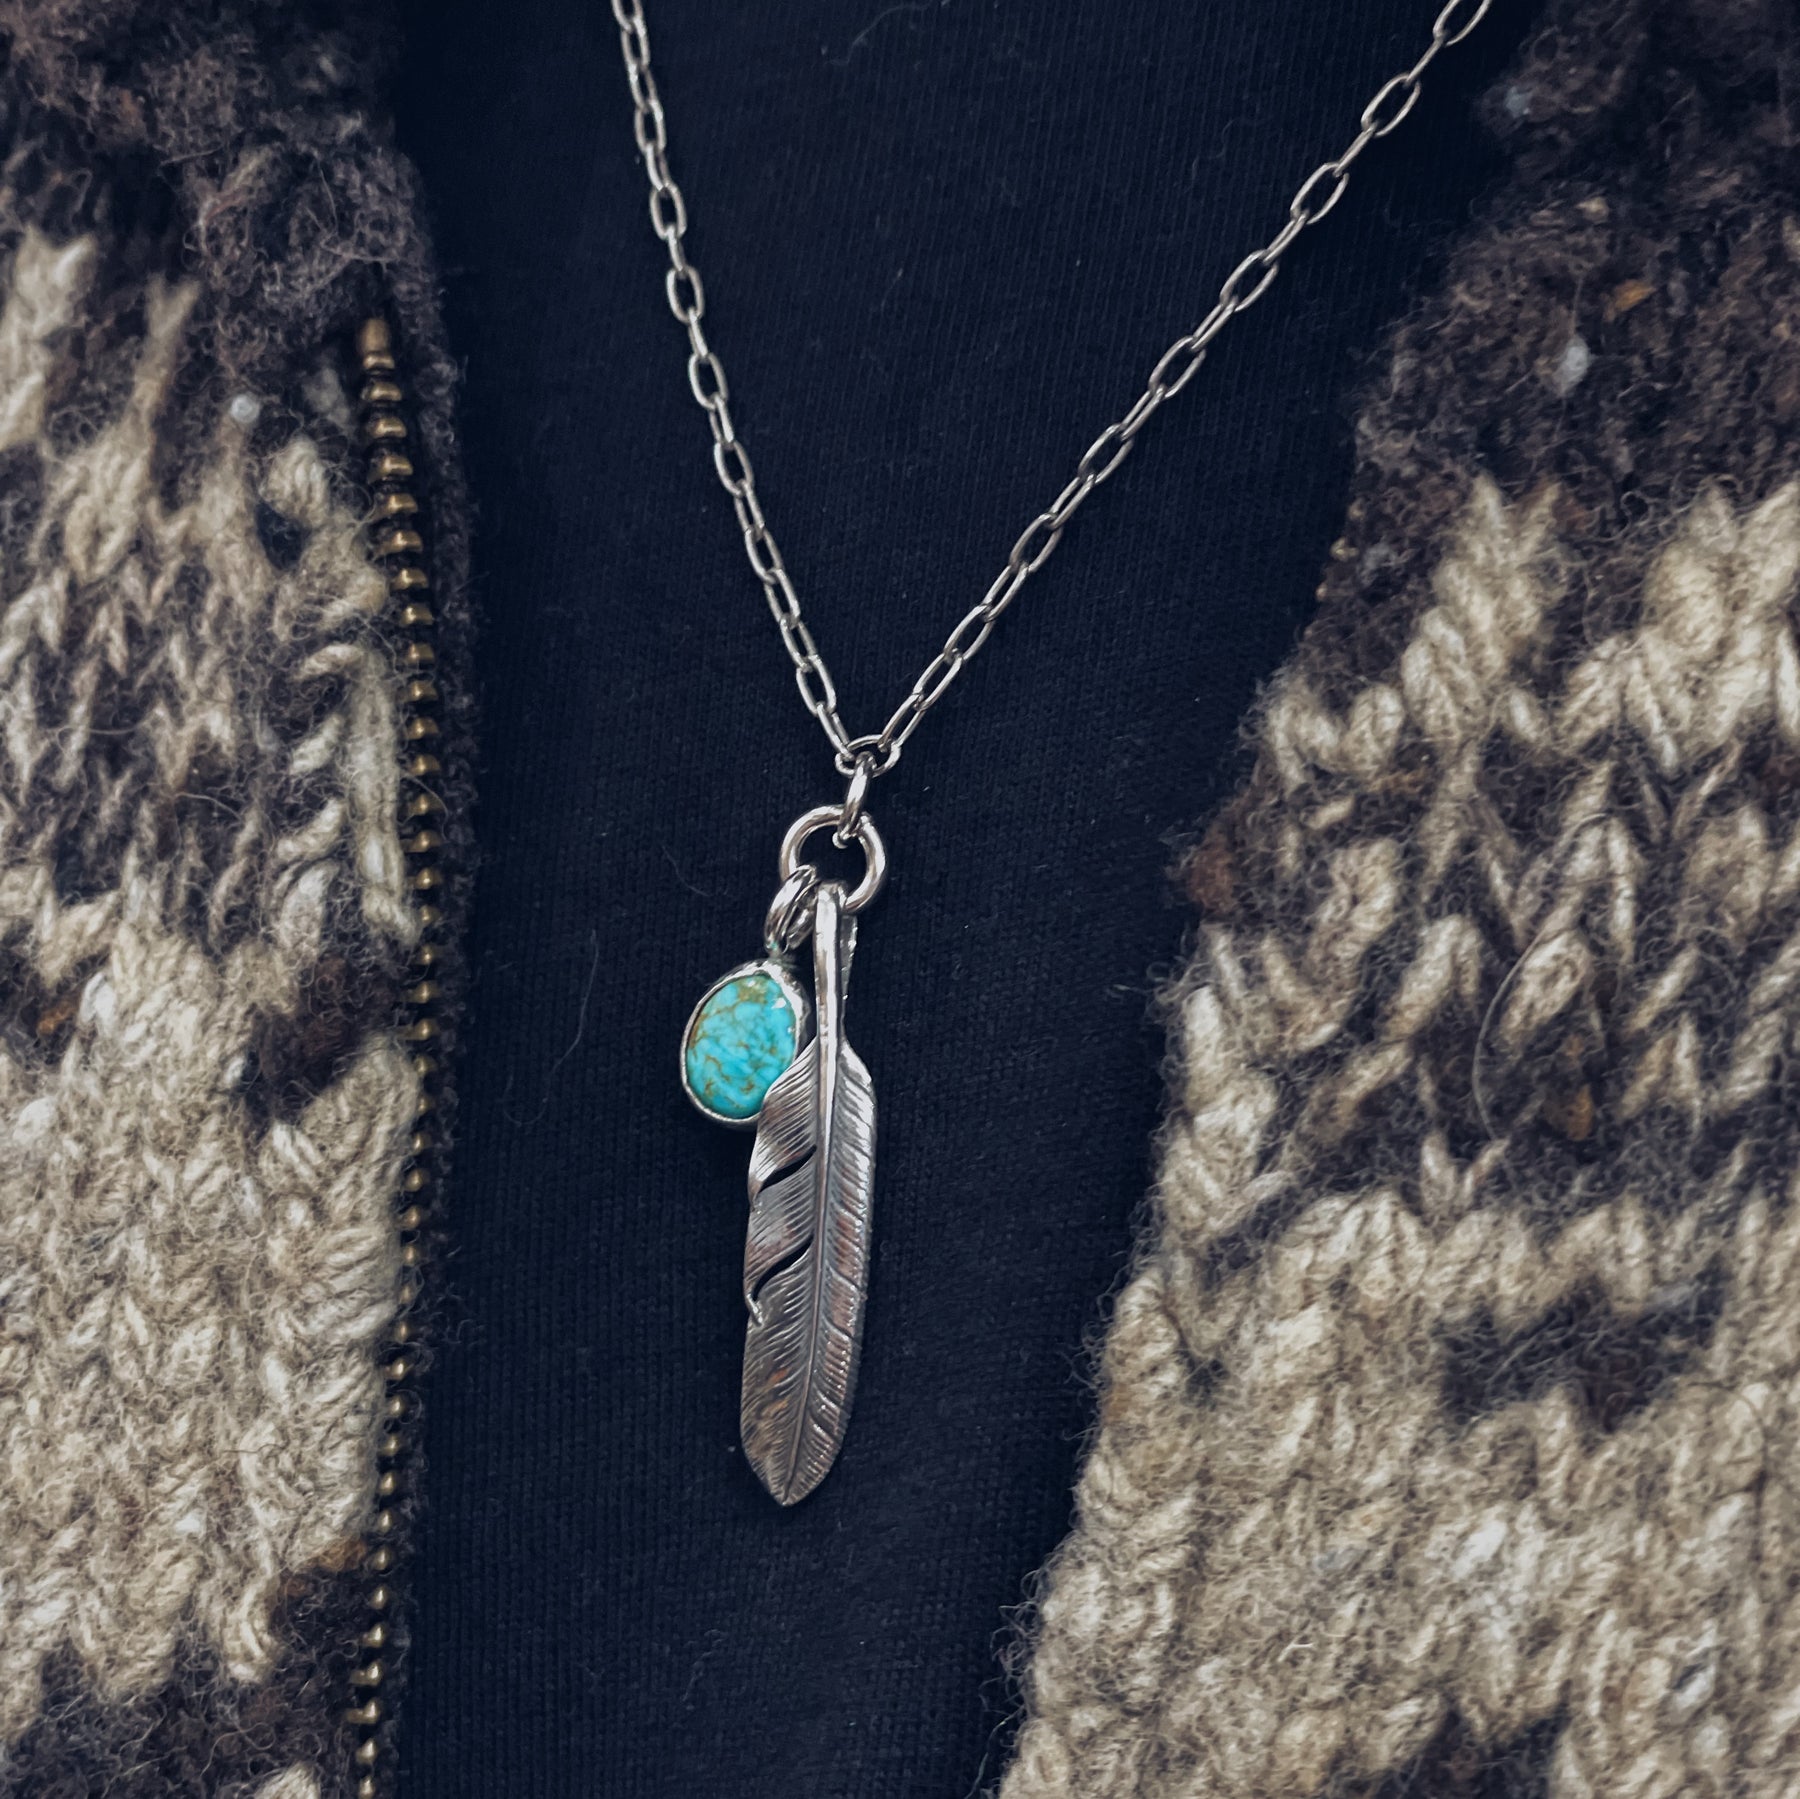 Mt. Hill Silver Sterling Silver Feather Chain Necklace with Turquoise